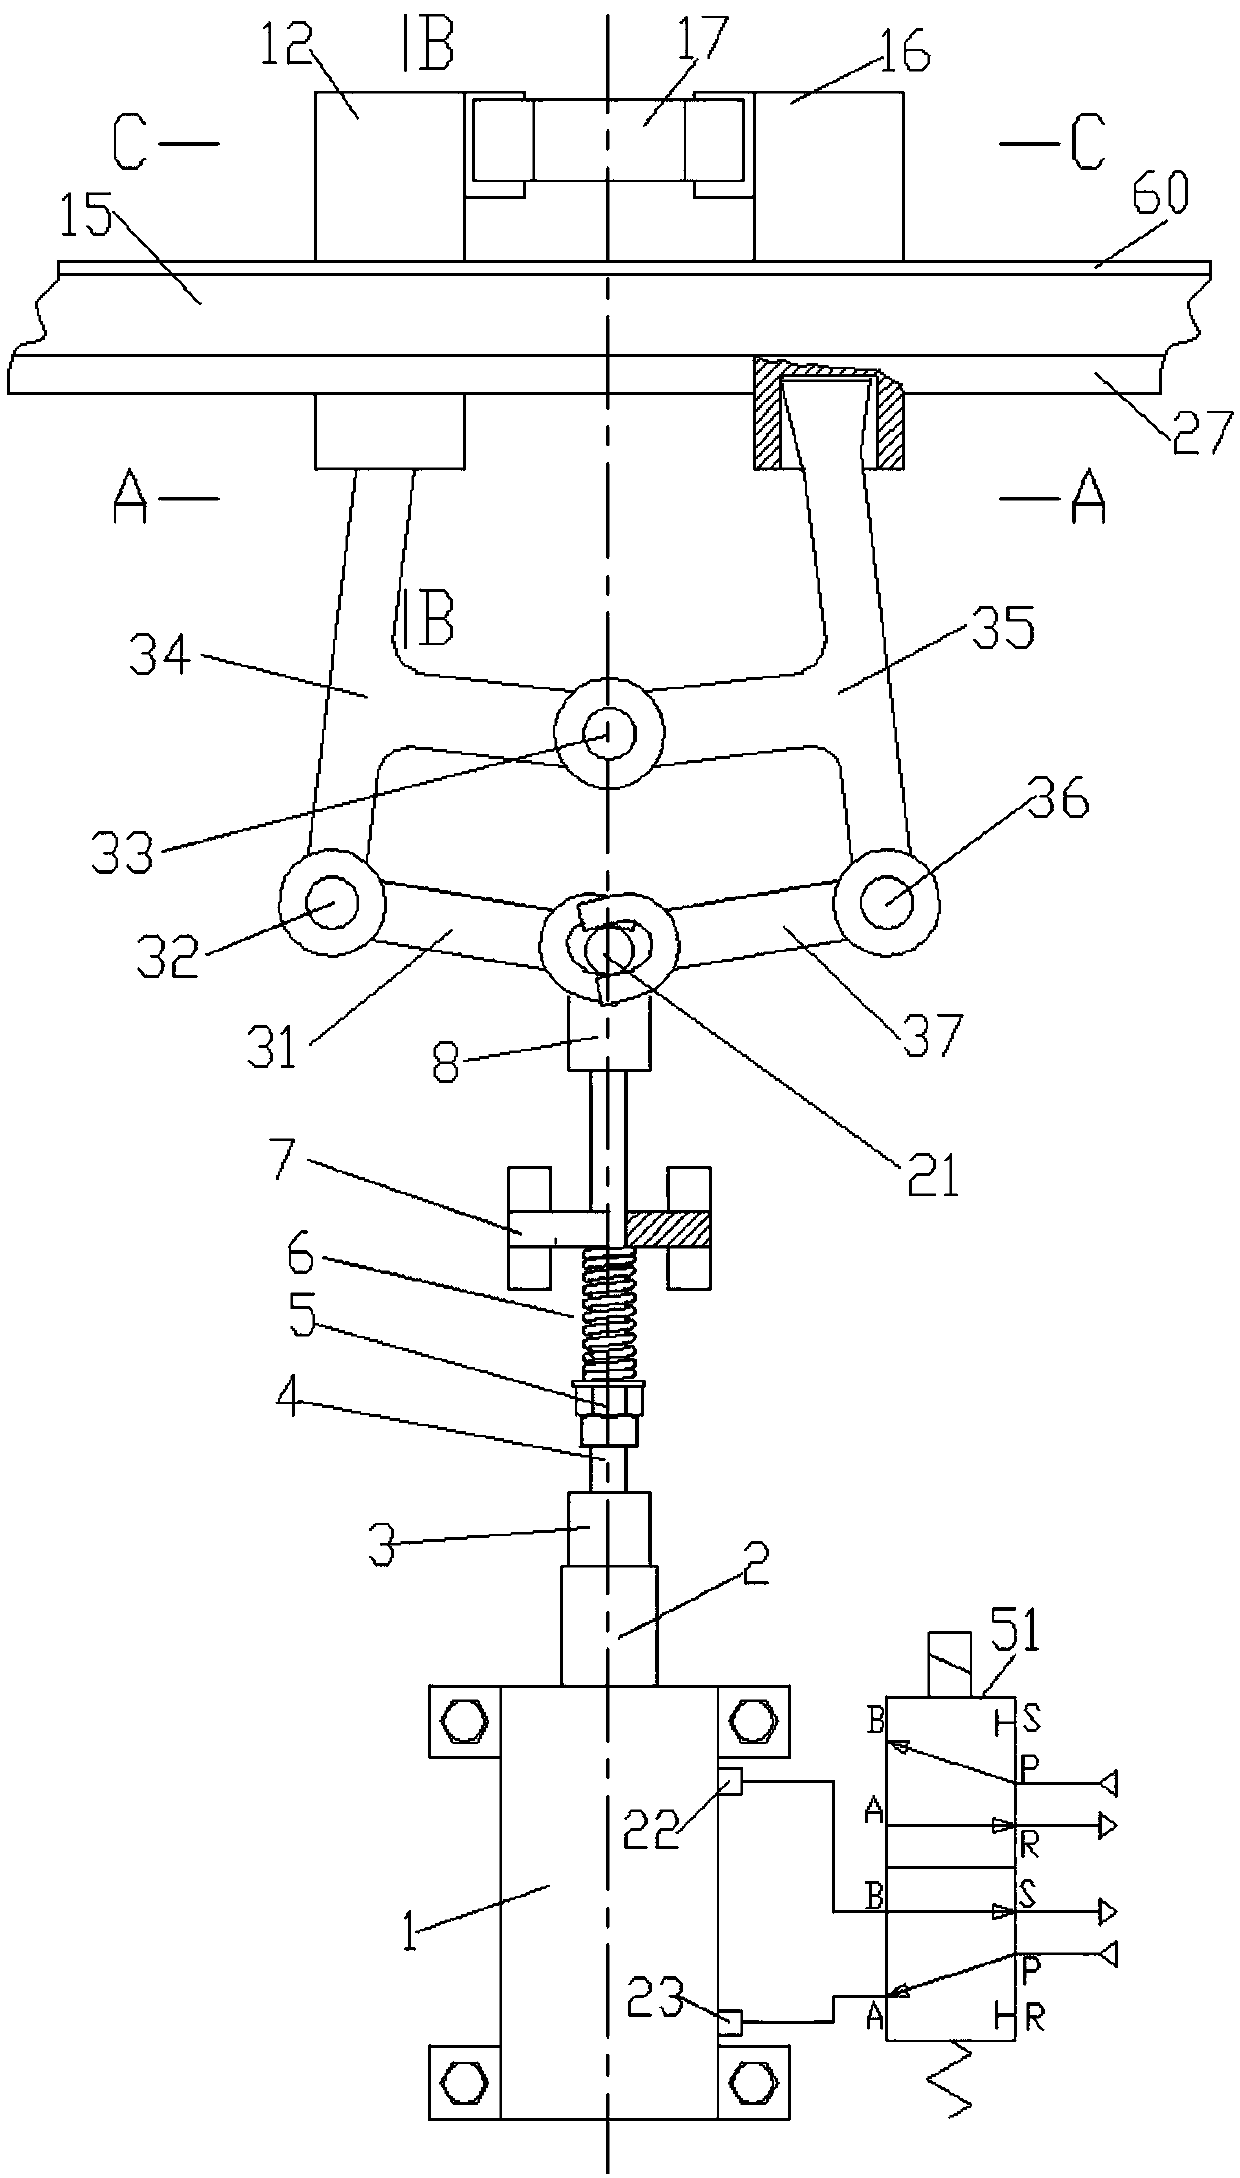 Horizontal leveling control and safety brake device for rack and pinion lifting equipment